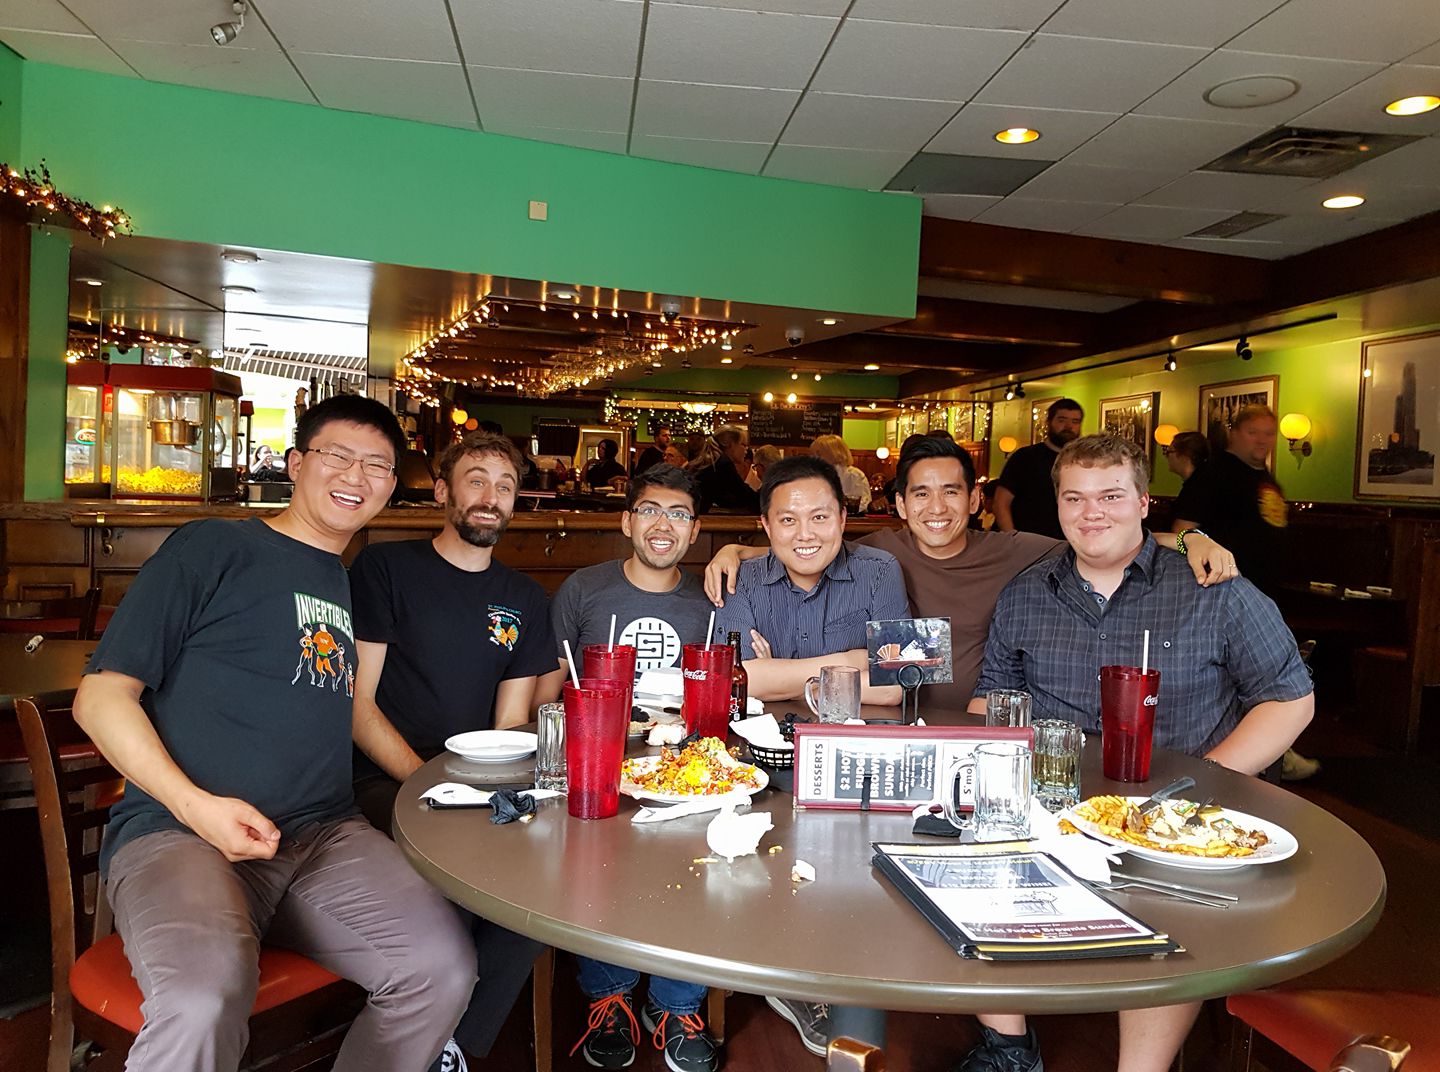 A picture of Cameron with his labmates, sitting around a table in a diner